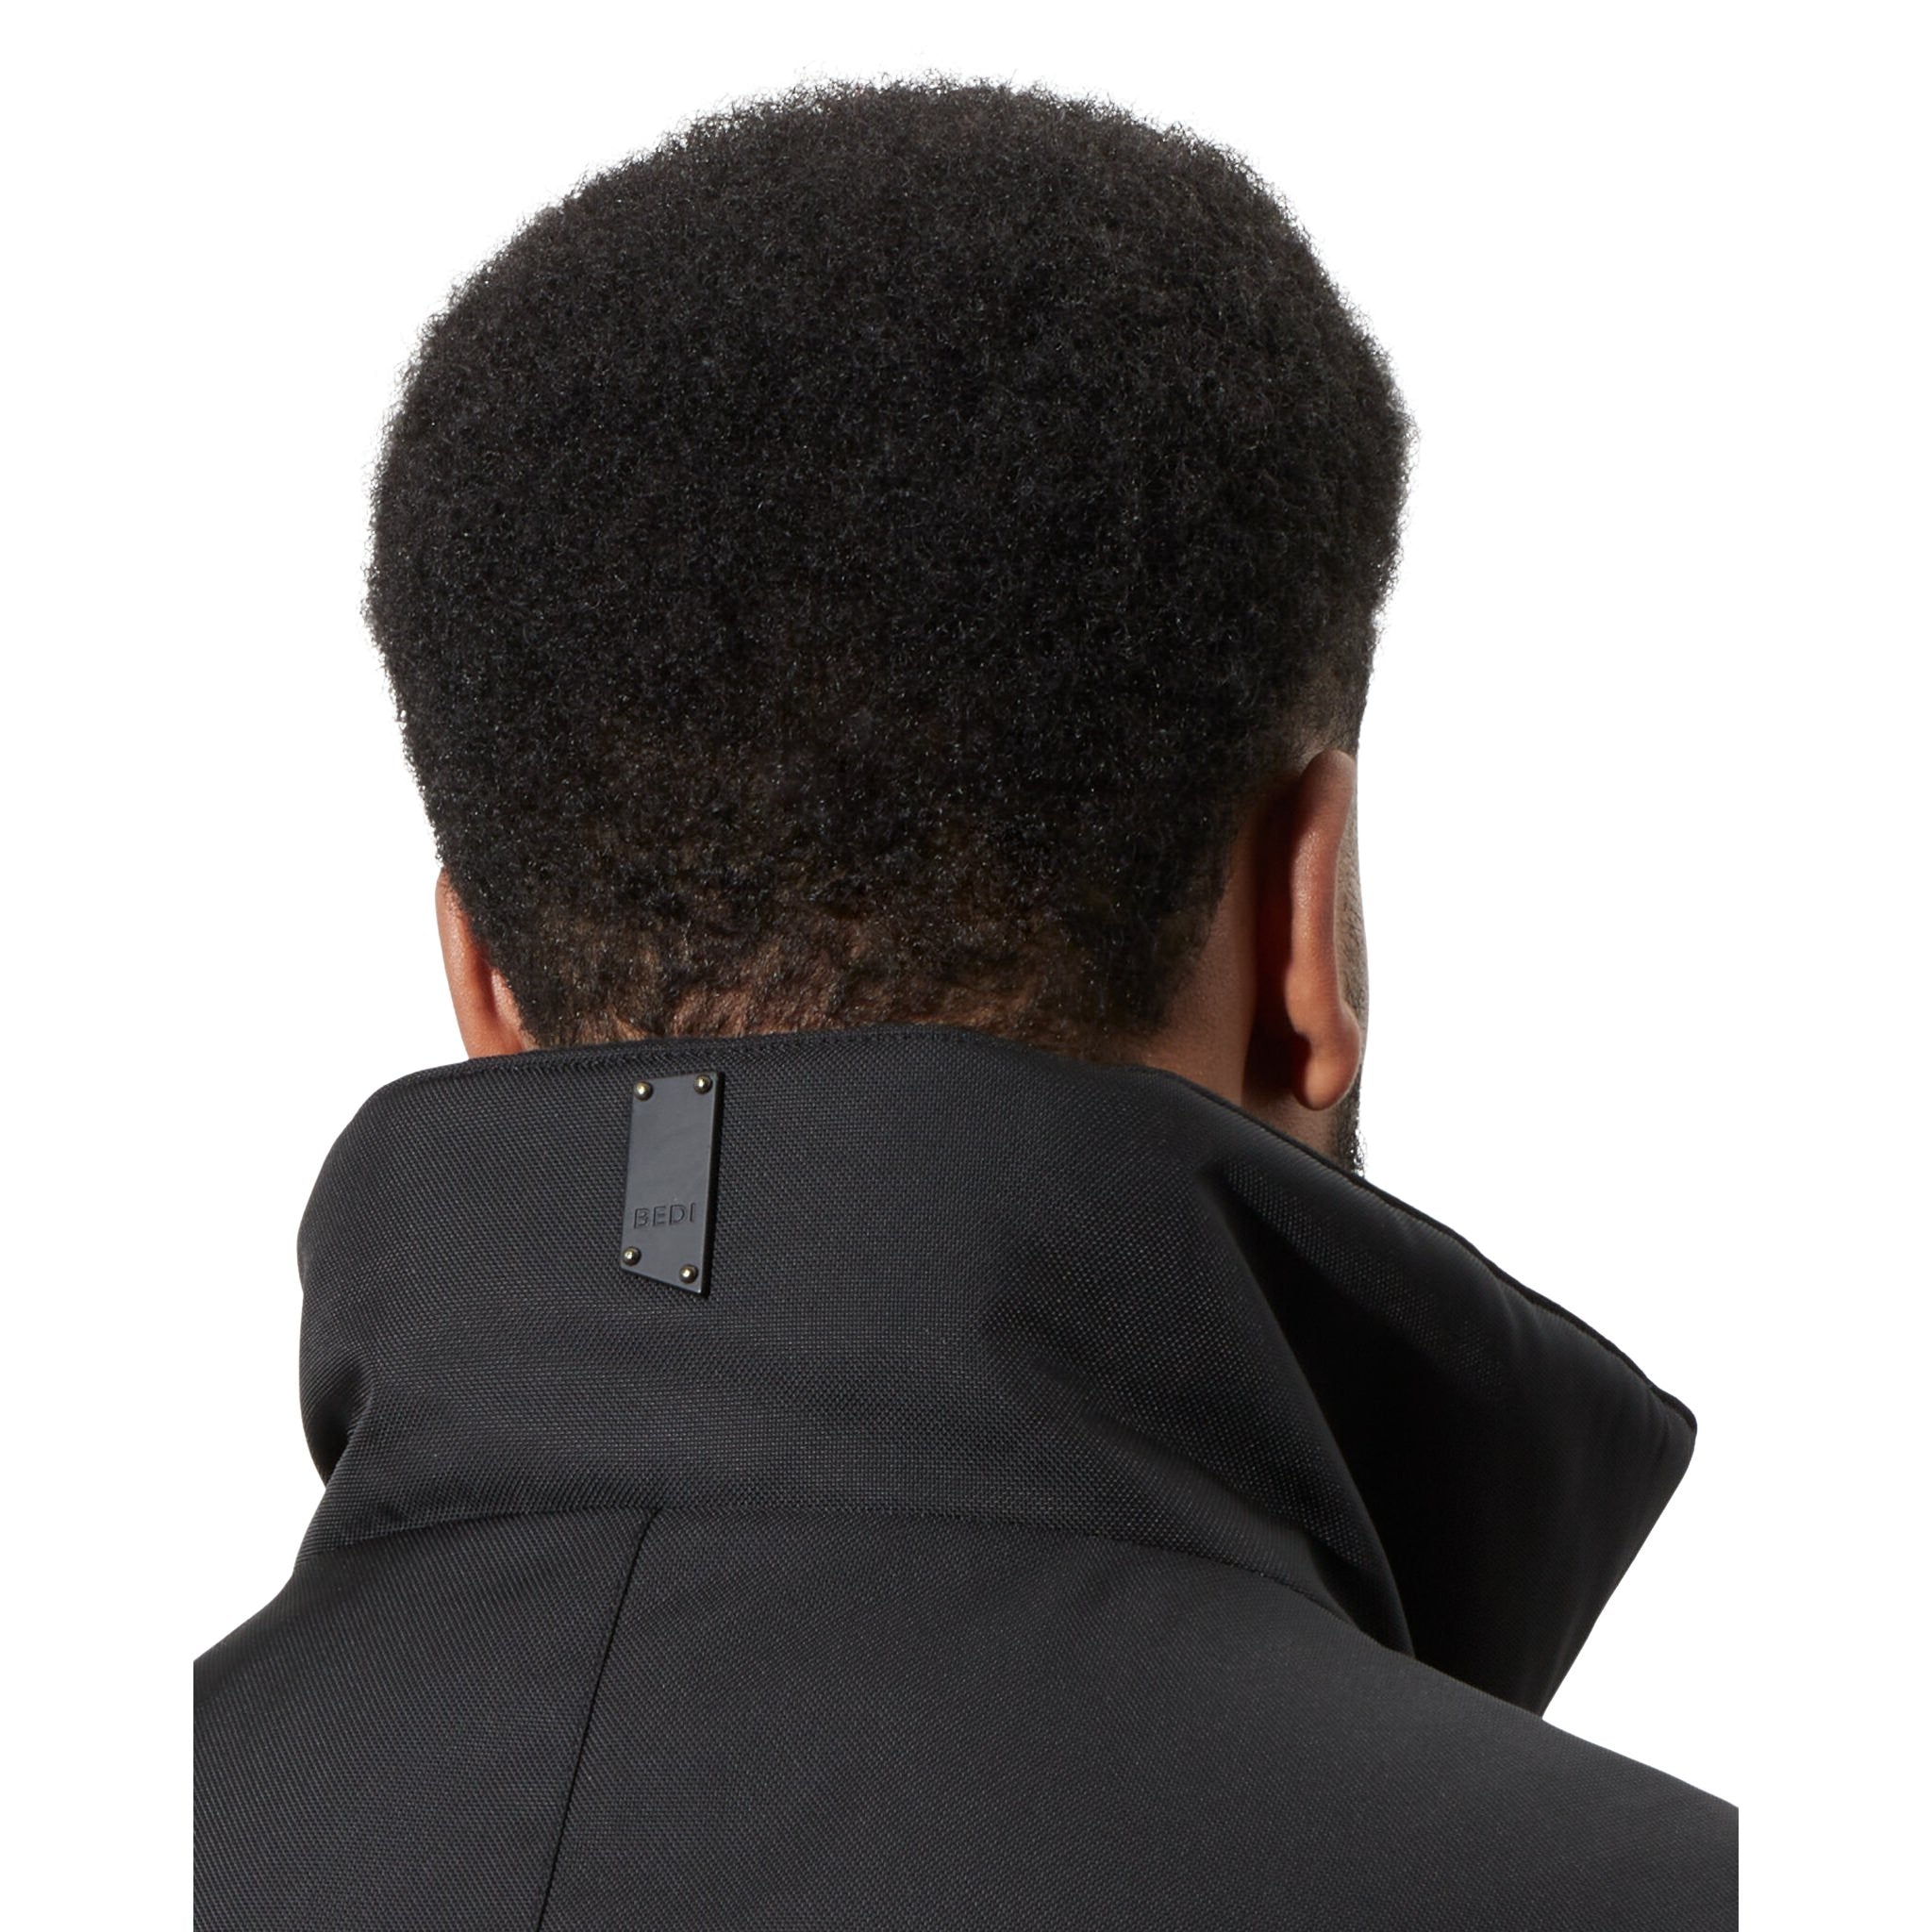 Close up view of the high neck of the black Montcalm vest, on a man with short dark hair